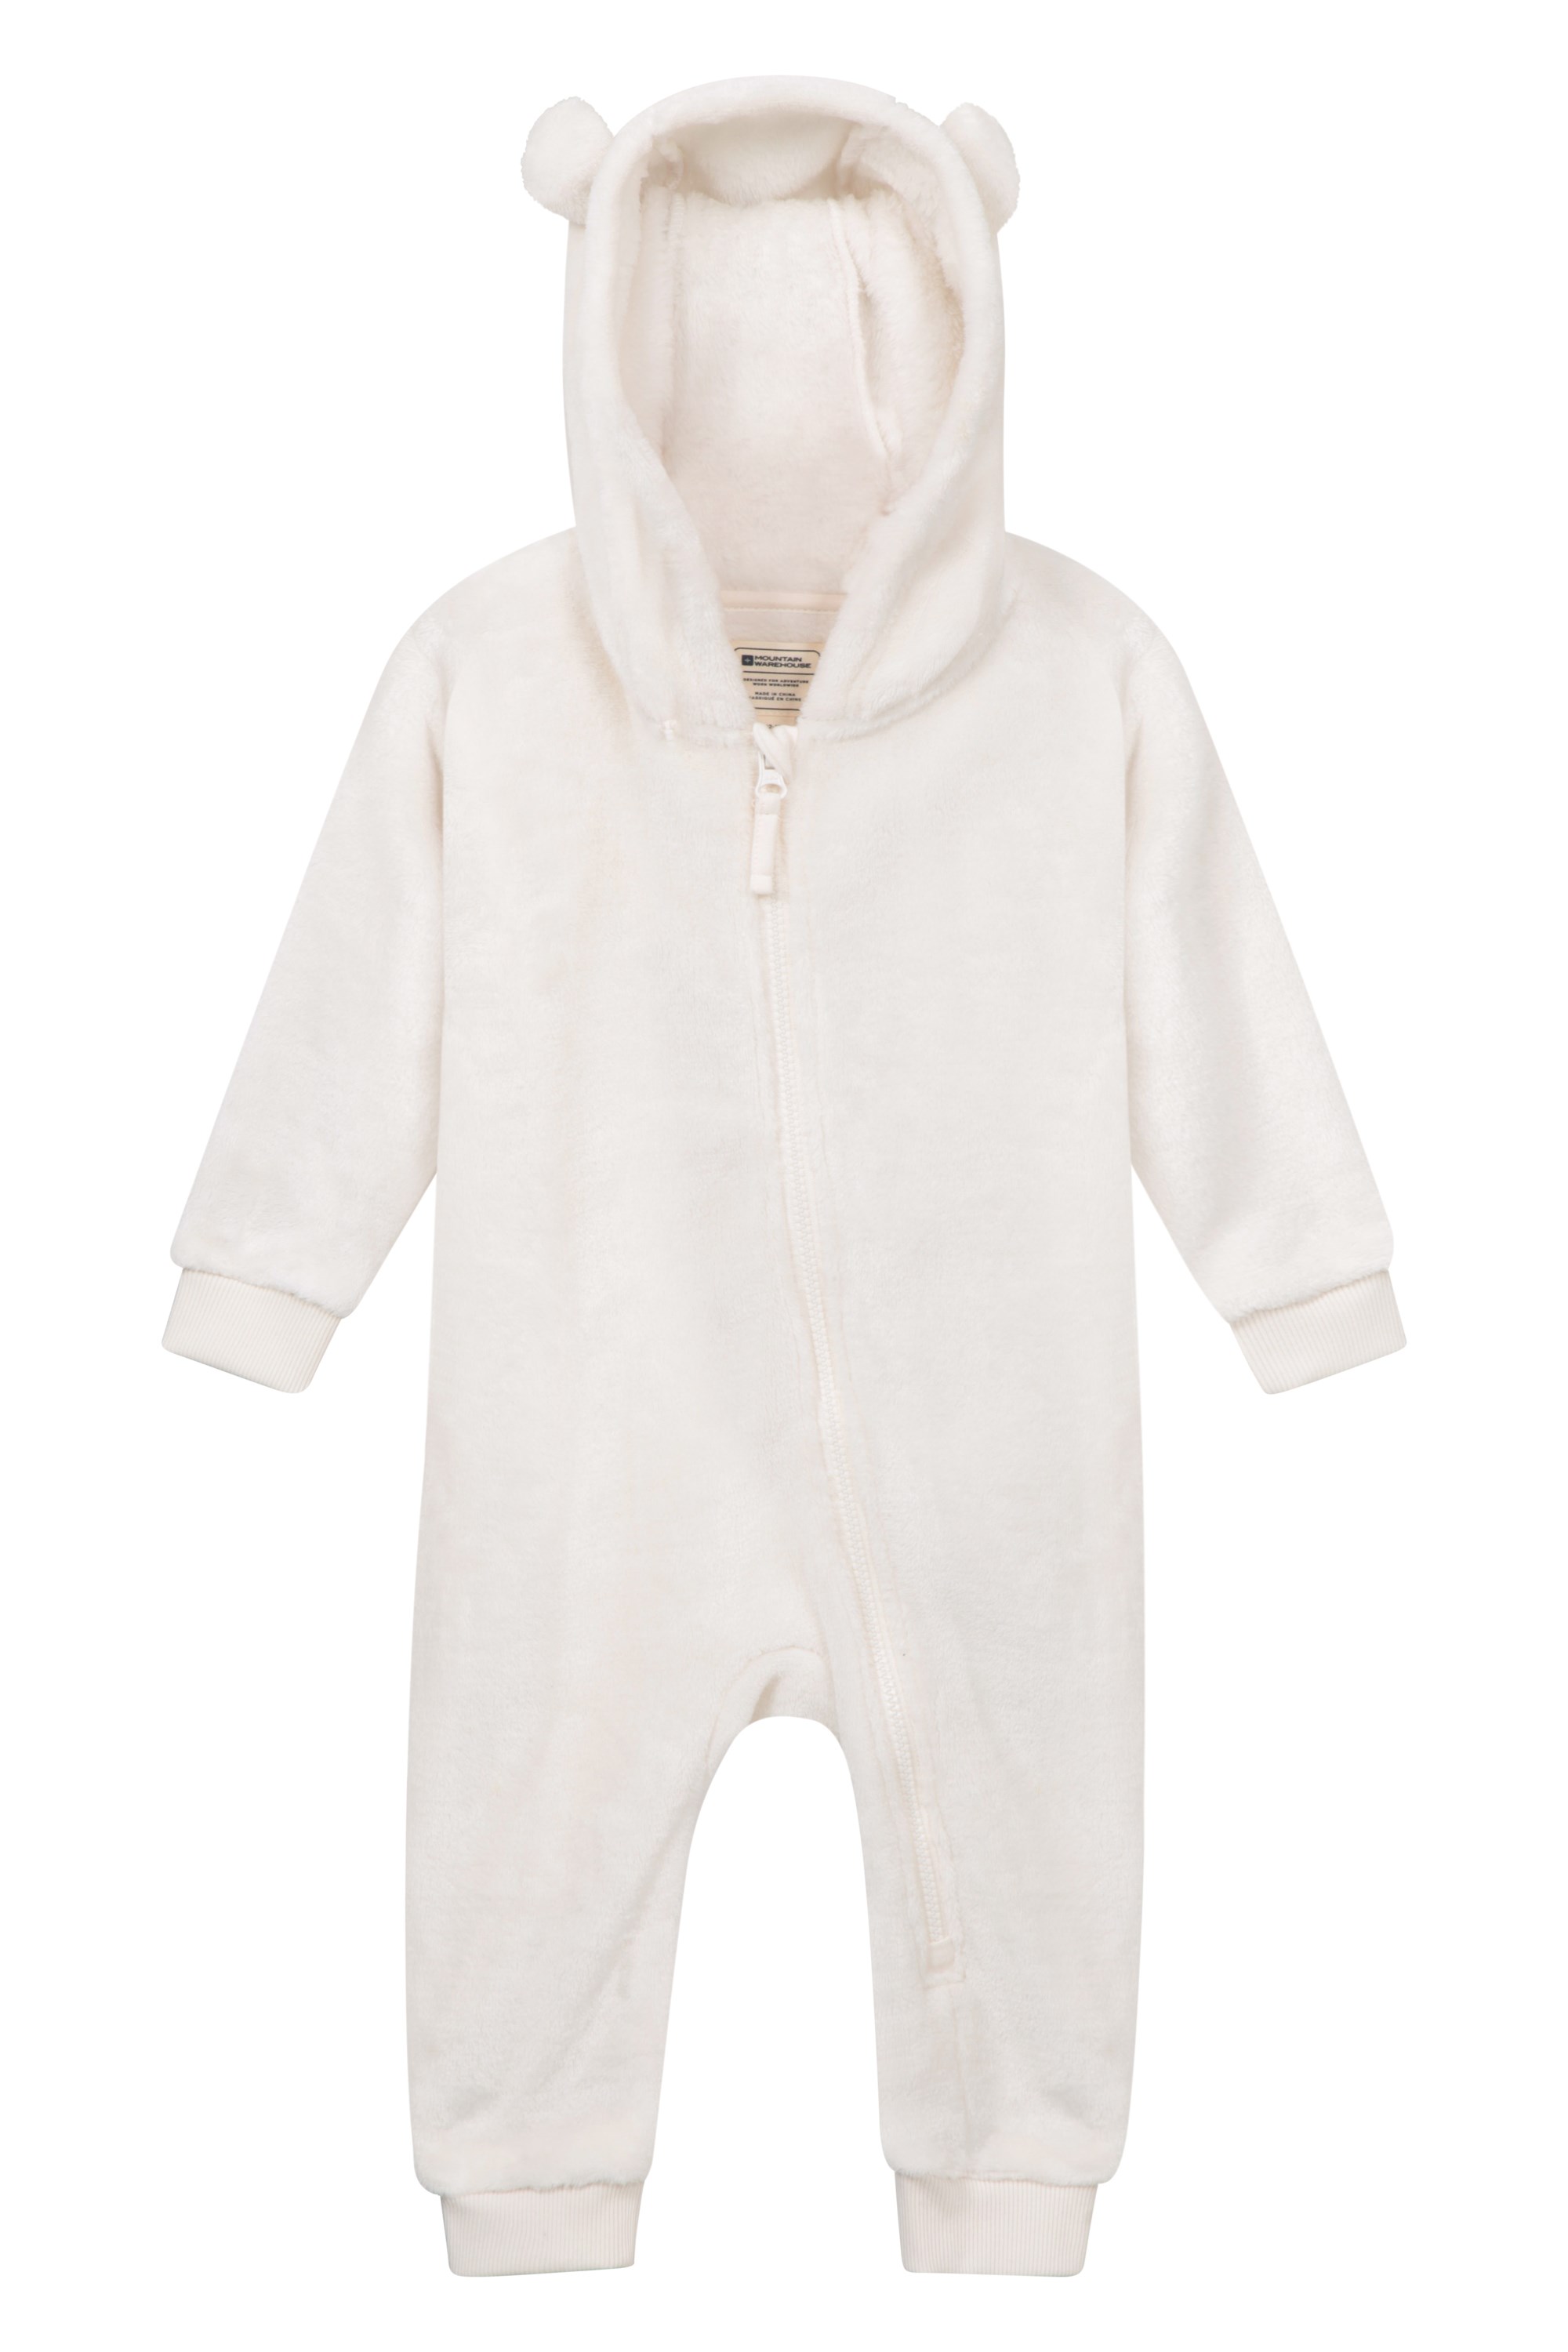 Baby Snuggly All In One - Cream